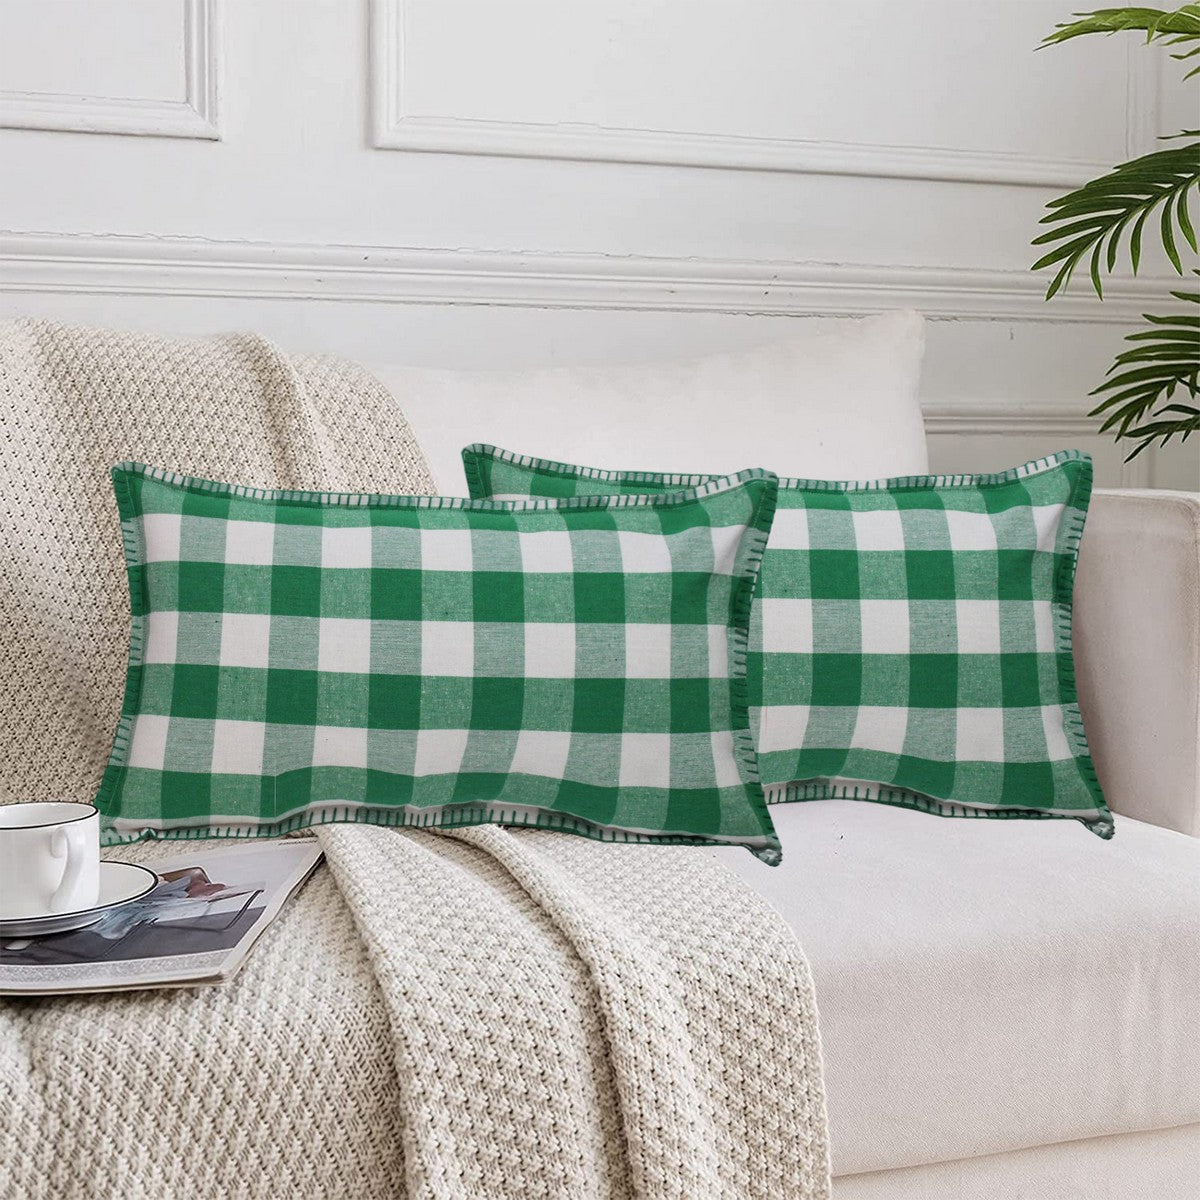 Lushomes Rectangle Cushion Cover with Blanket Stitch, Cotton Sofa Pillow Cover Set of 2, 12x20 Inch, Big Checks, Green and White Checks, Pillow Cushions Covers (Pack of 2, 30x50 Cms)